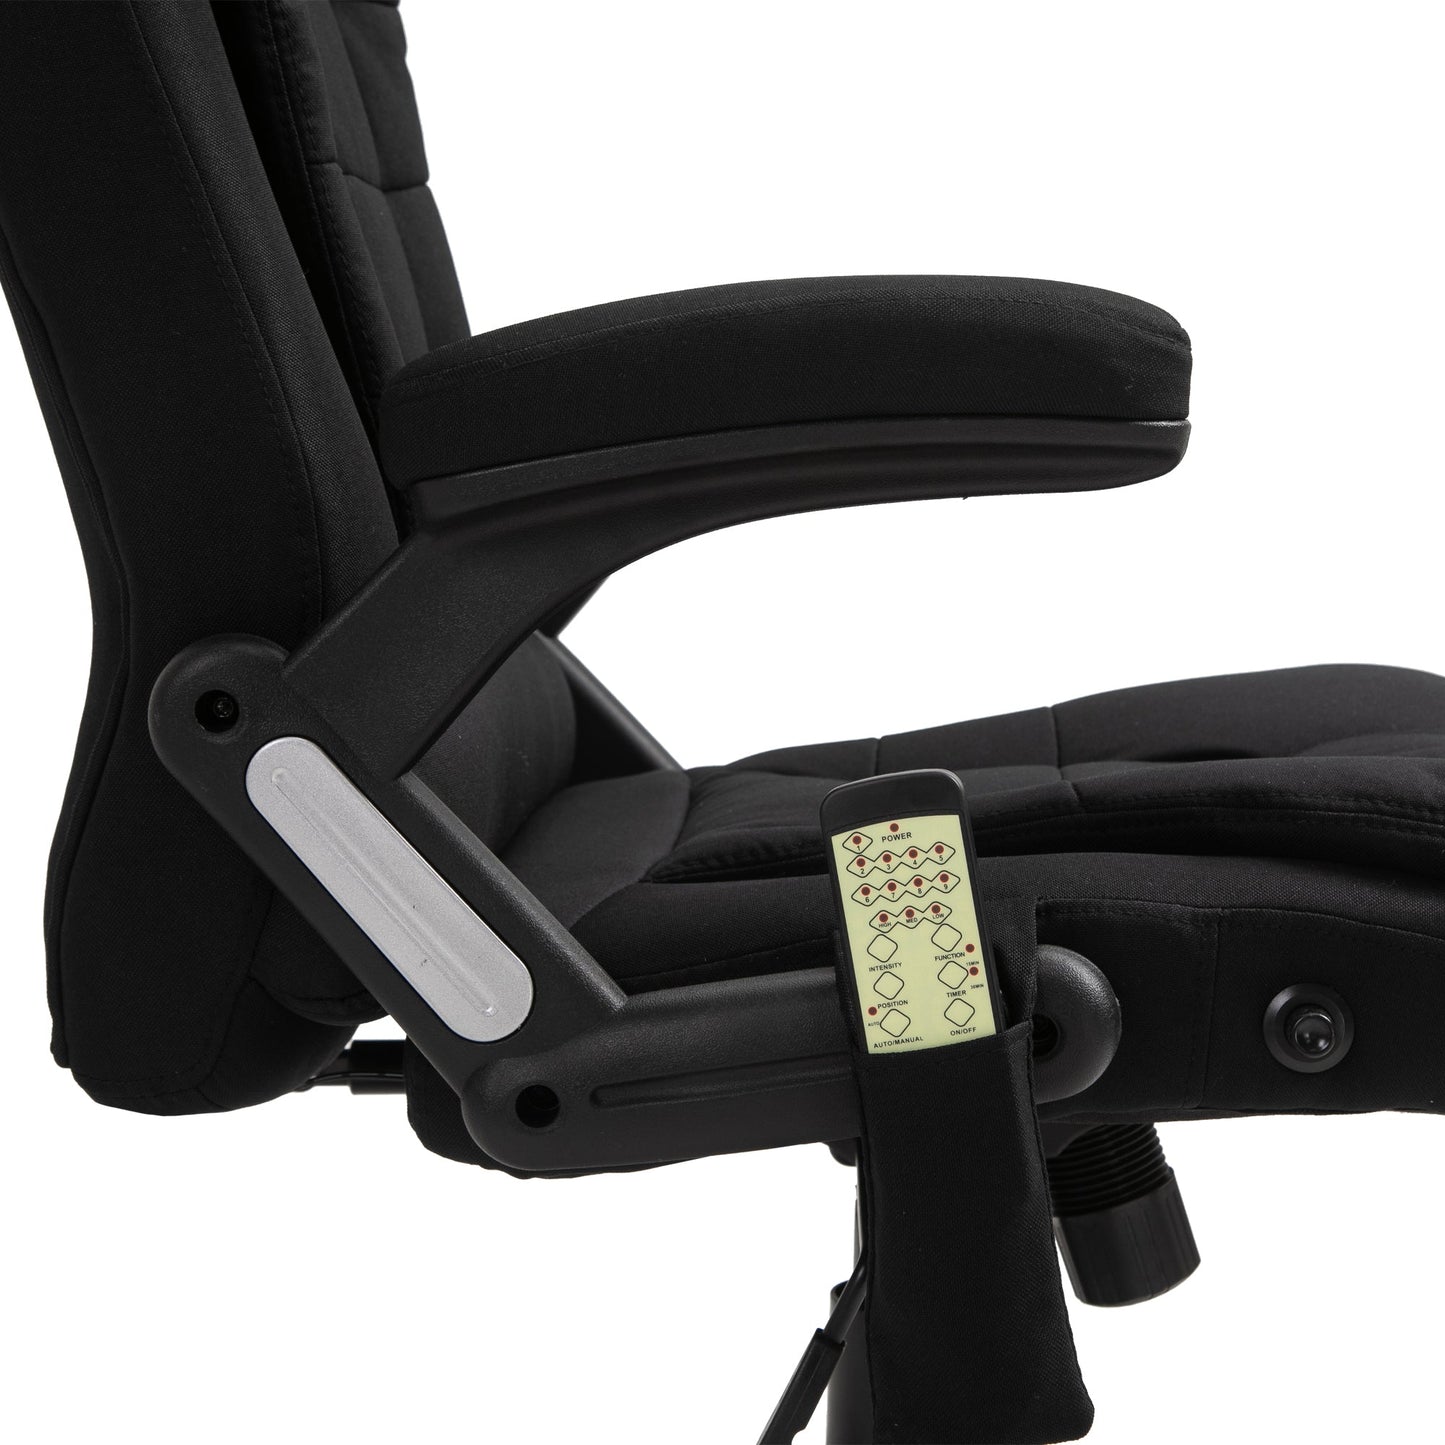 6 Point Vibrating Massage Office Chair High Back Executive Chair with Reclining Back, Swivel Wheels, Black at Gallery Canada